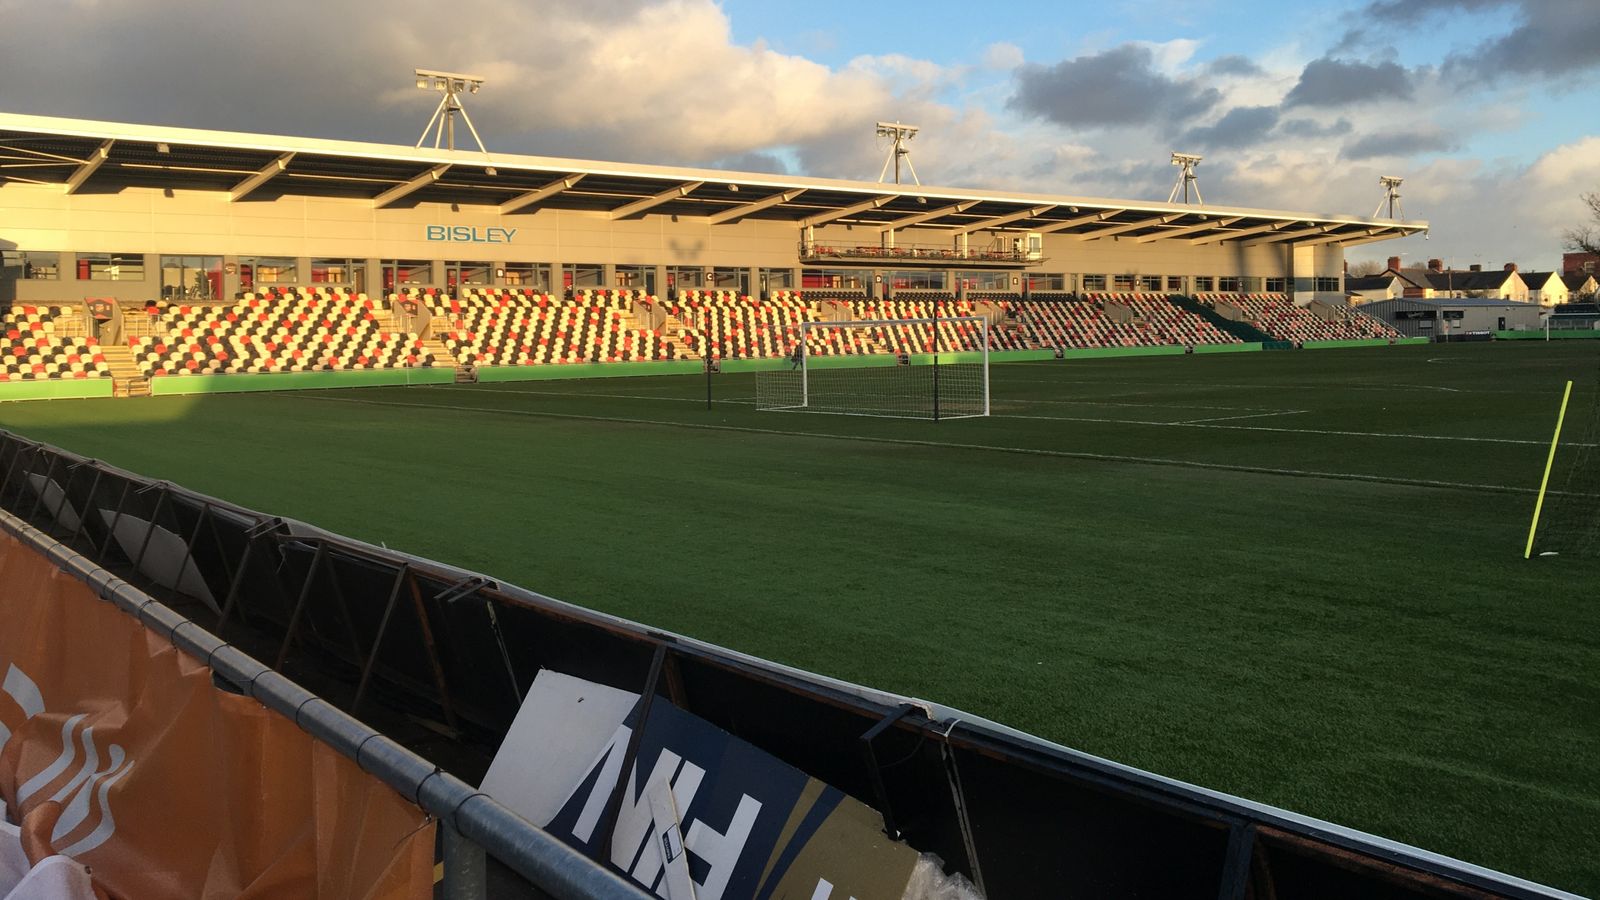 Newport County Football Club shuts ticket office after 'appalling abuse' ahead of Manchester United tie